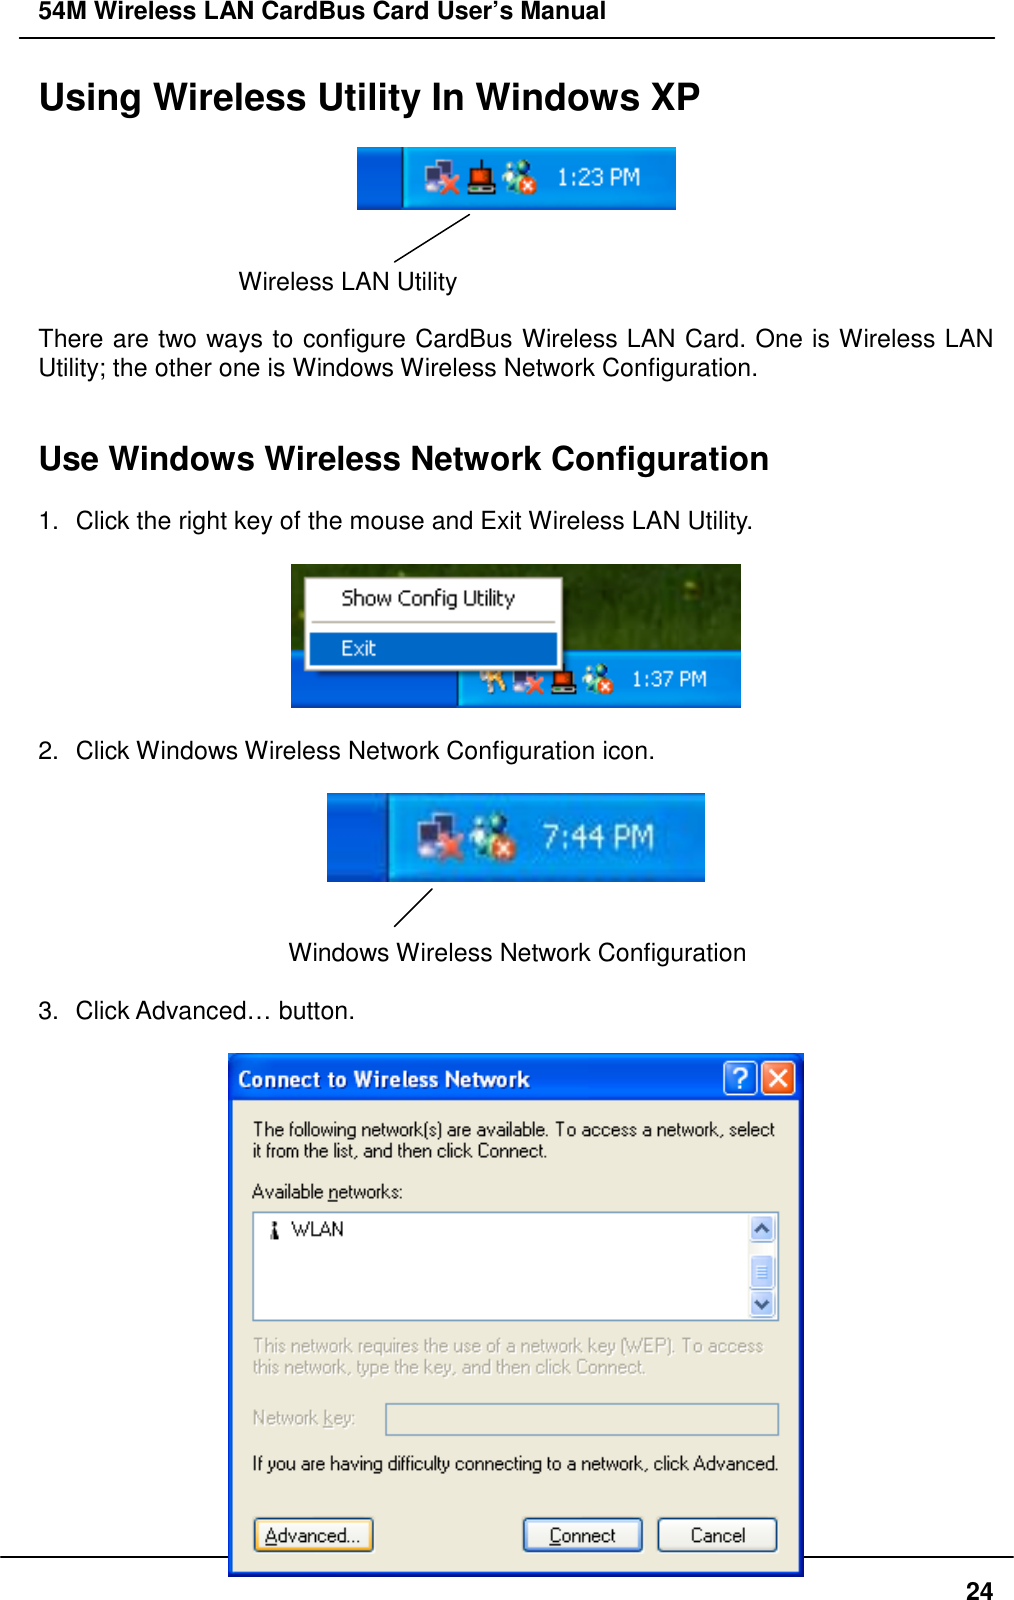 54M Wireless LAN CardBus Card User’s Manual24Using Wireless Utility In Windows XPWireless LAN UtilityThere are two ways to configure CardBus Wireless LAN Card. One is Wireless LANUtility; the other one is Windows Wireless Network Configuration.Use Windows Wireless Network Configuration1.  Click the right key of the mouse and Exit Wireless LAN Utility.2.  Click Windows Wireless Network Configuration icon.Windows Wireless Network Configuration3. Click Advanced… button.